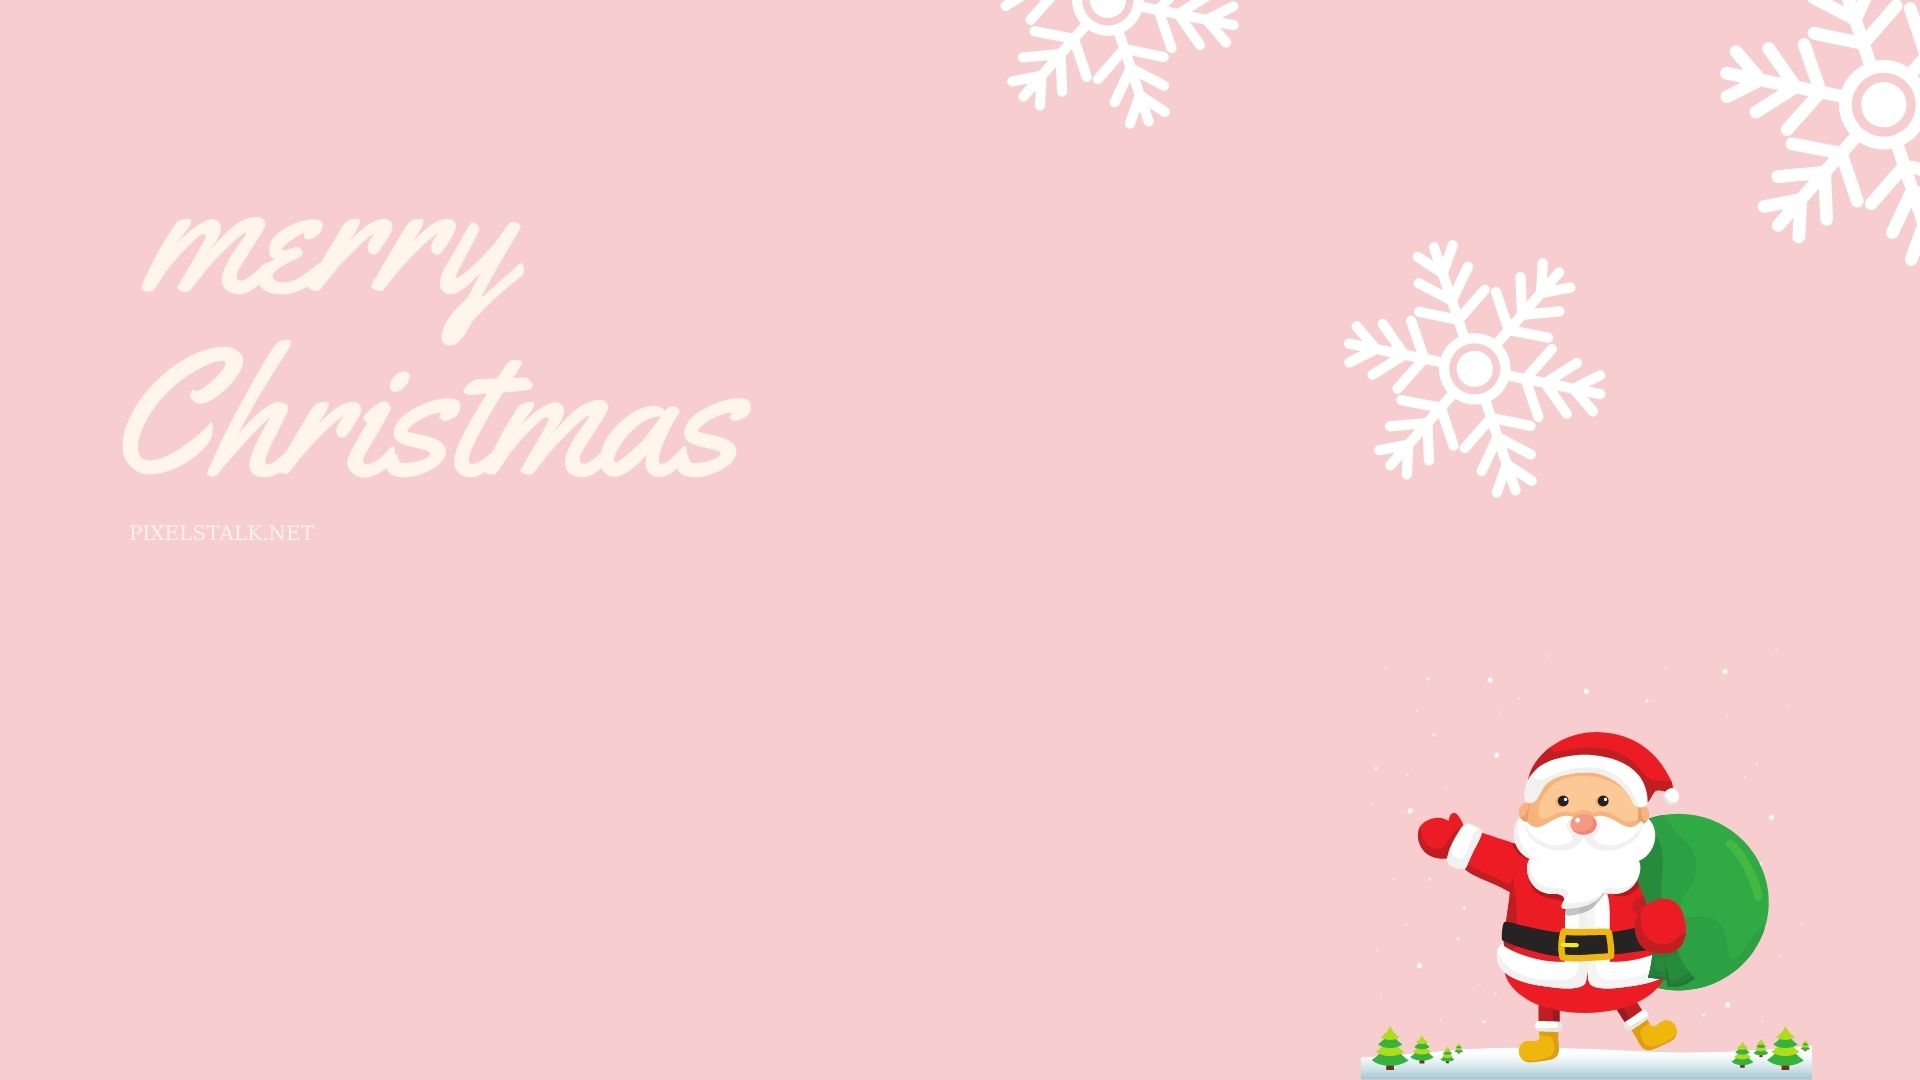 Merry Christmas Wallpapers and Backgrounds